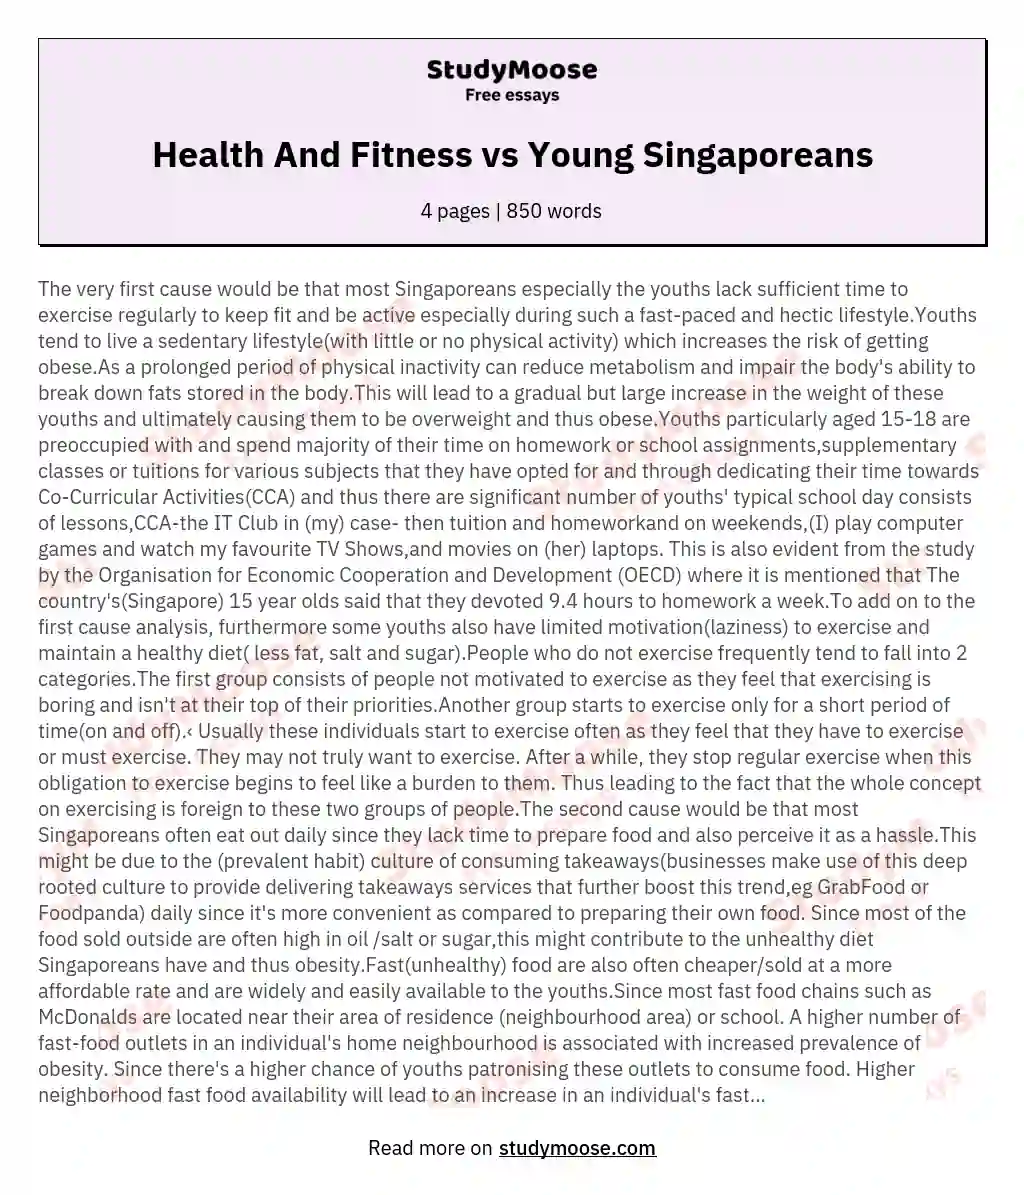 Health And Fitness vs Young Singaporeans essay